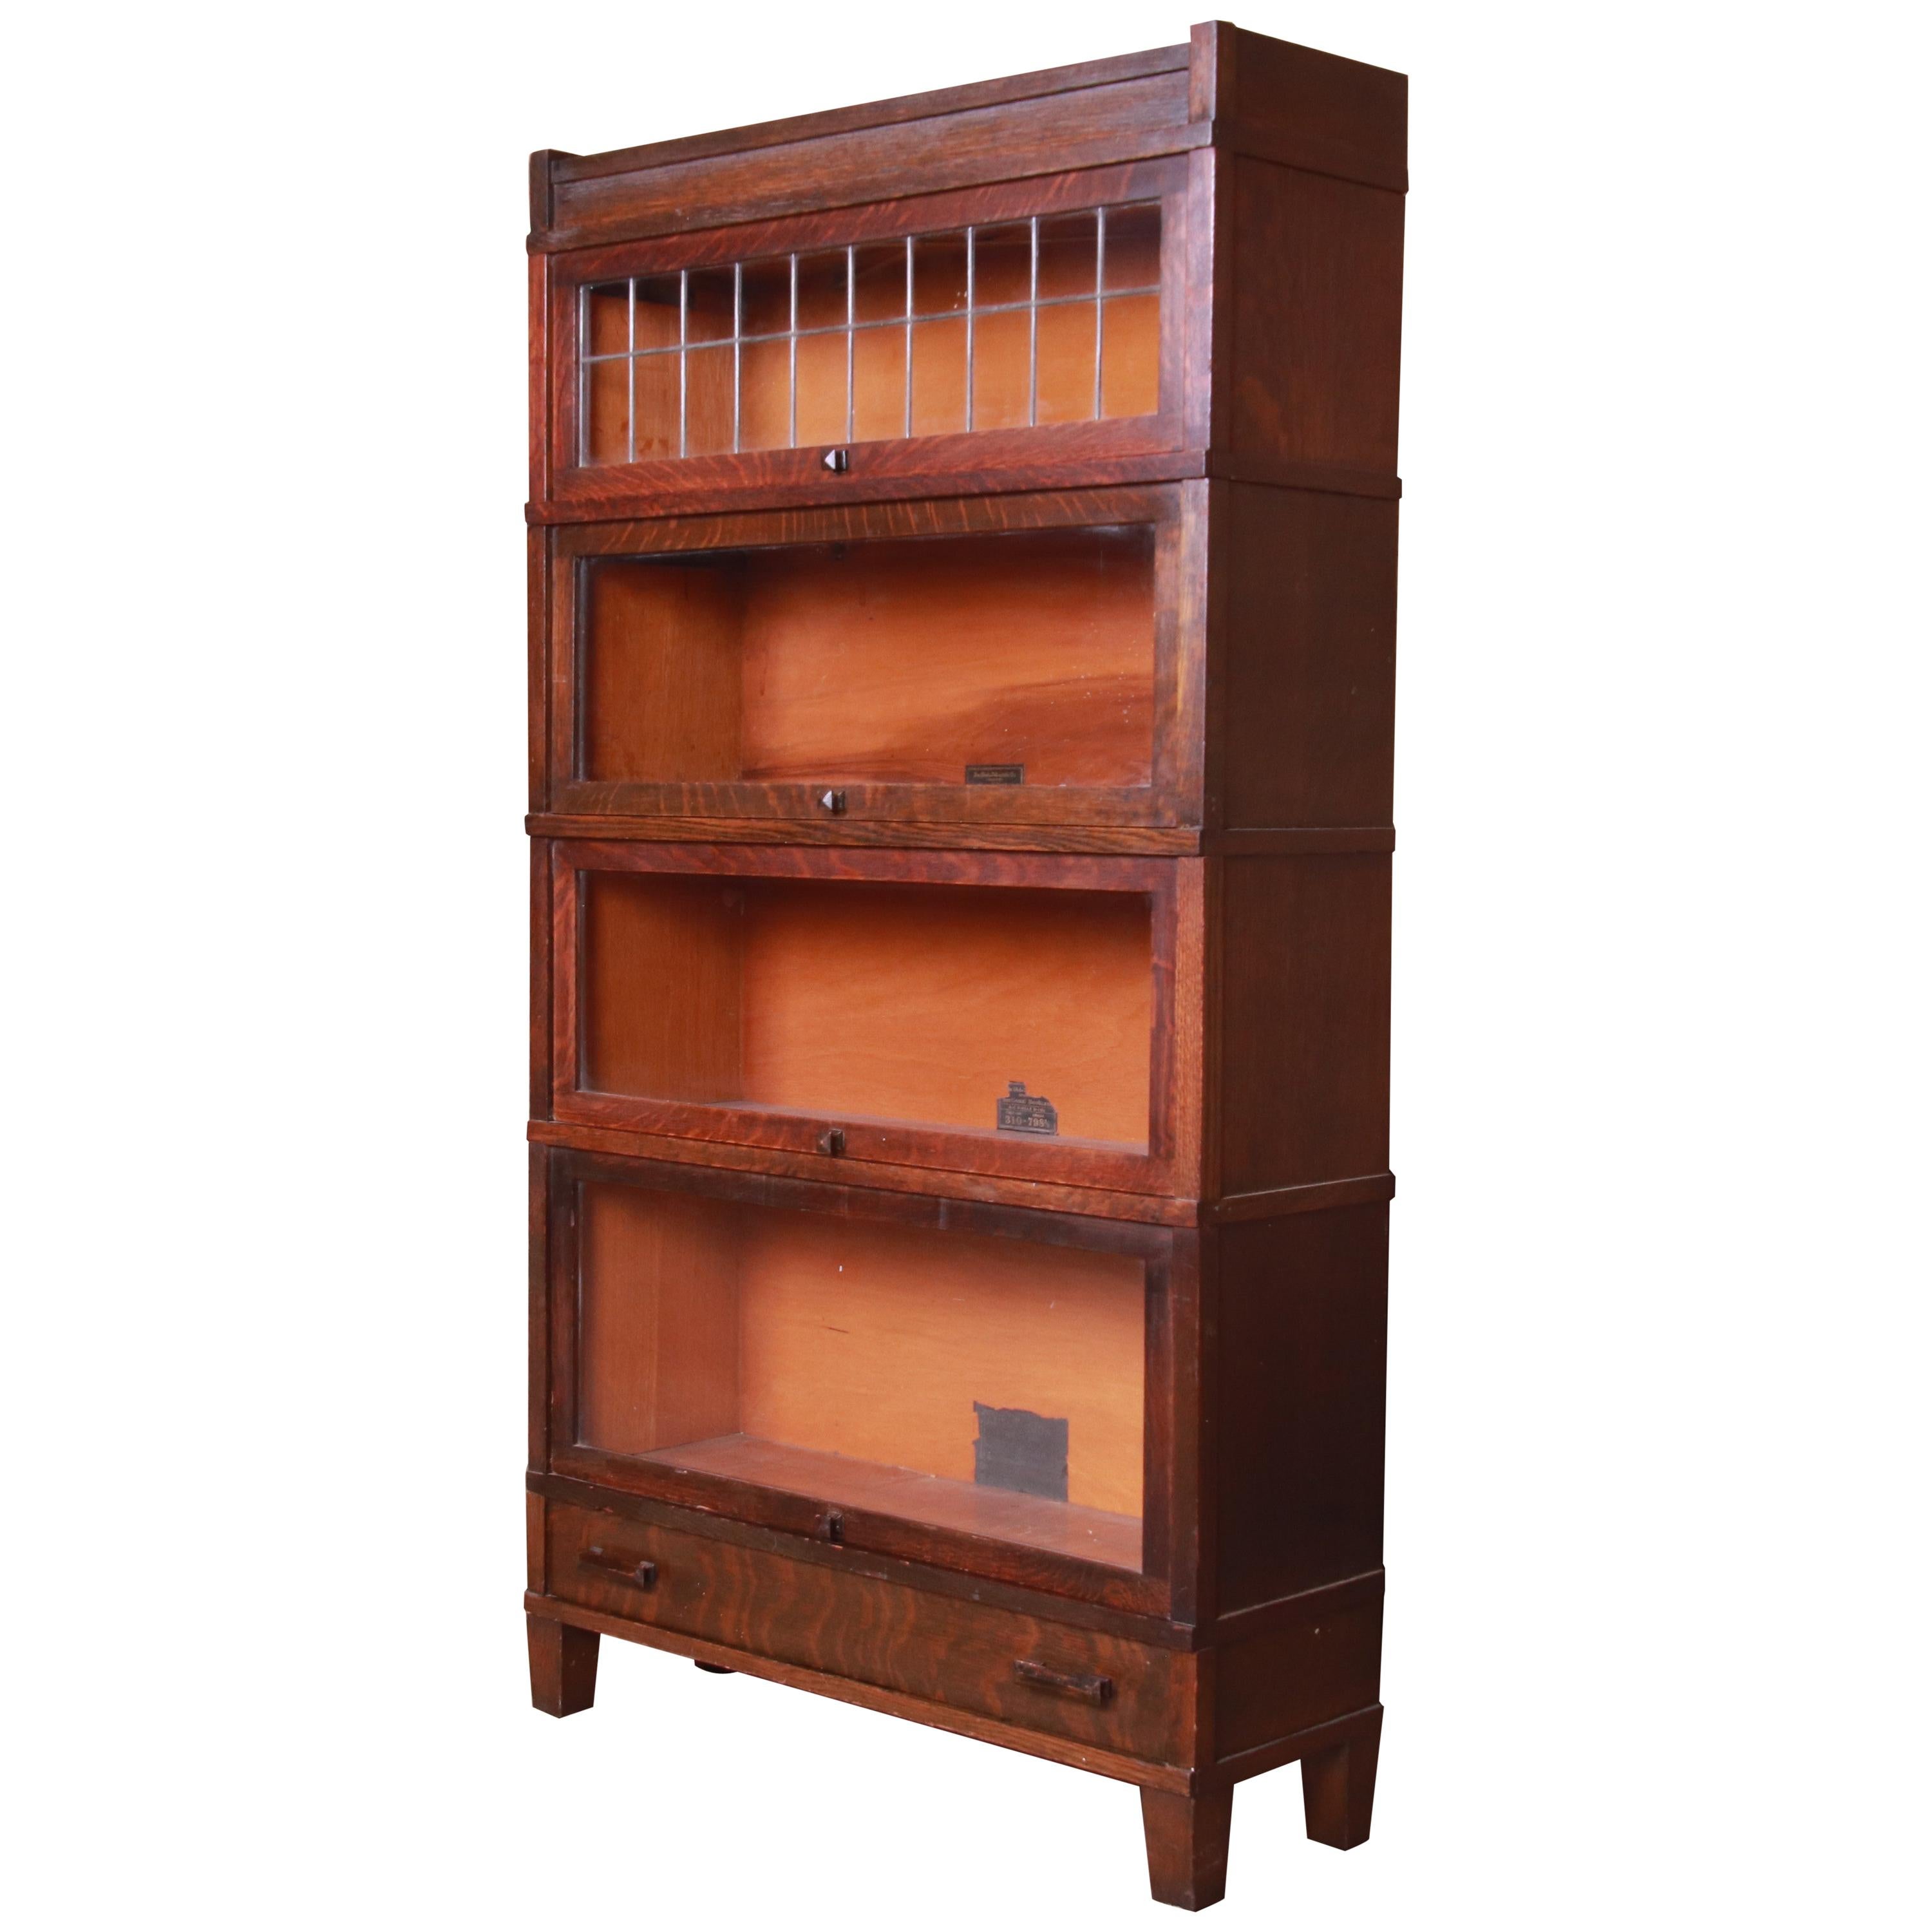 Globe Wernicke Four-Stack Oak Barrister Bookcase with Leaded Glass, circa 1920s